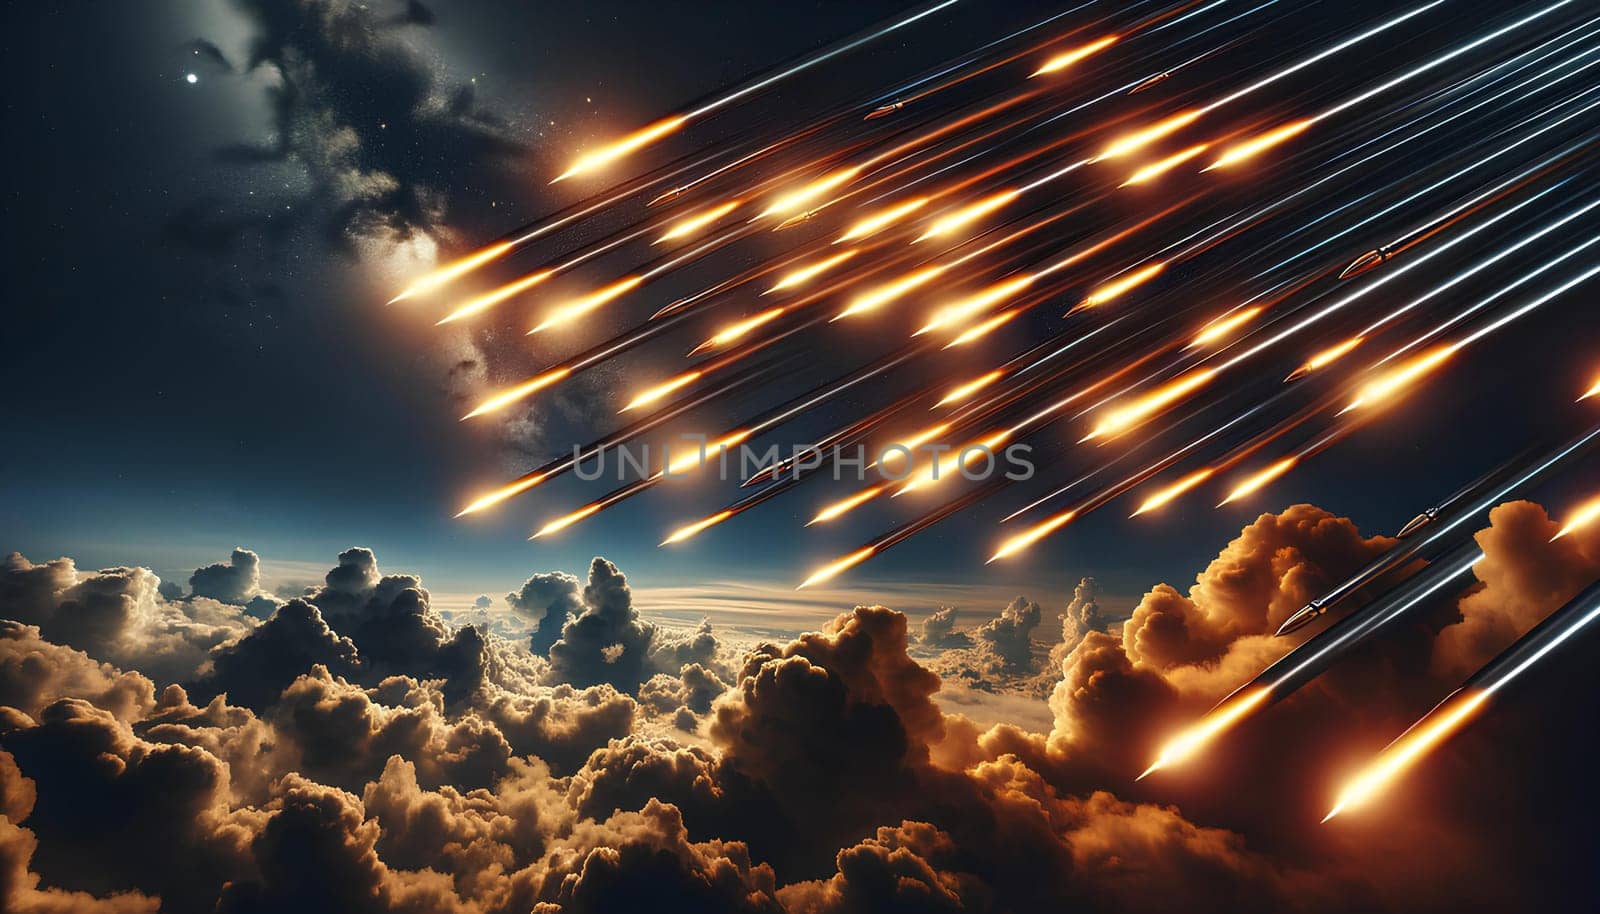 tracer bullets flying into the clouds at night, dark night sky with clouds illuminated by a glowing trail by Annado